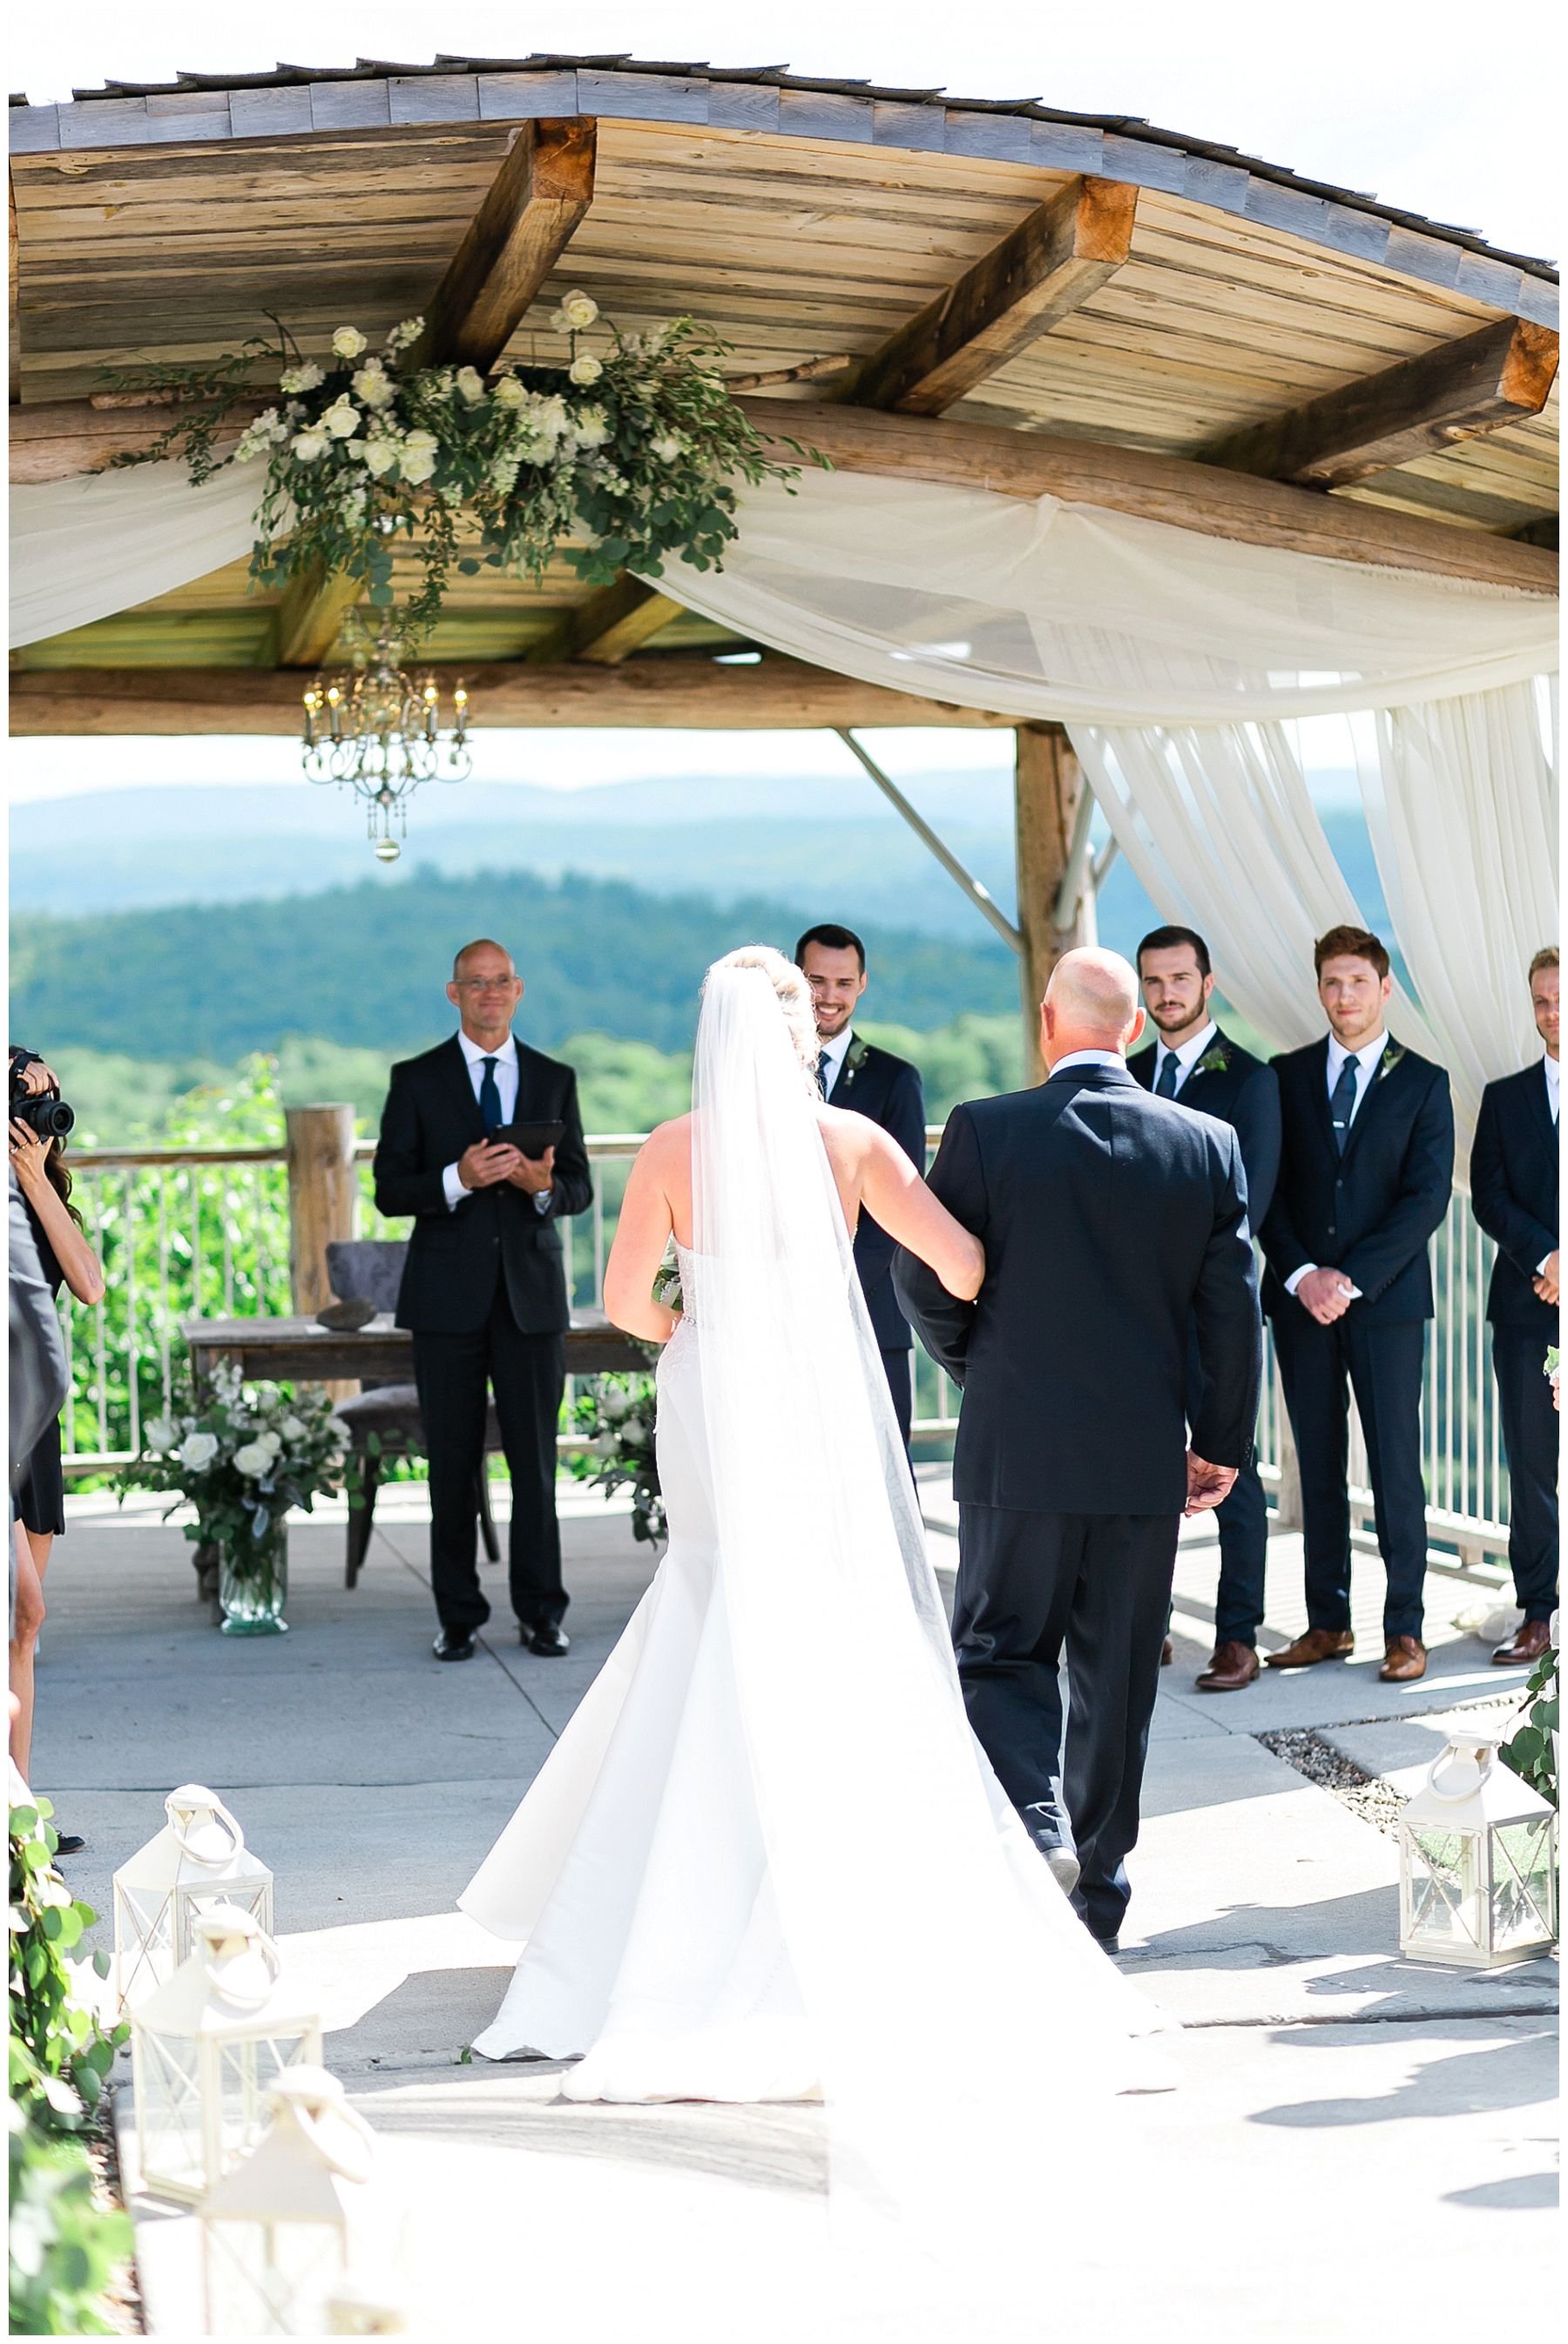 Bride walking down the aisle in outdoor ceremony under the arch cliffside